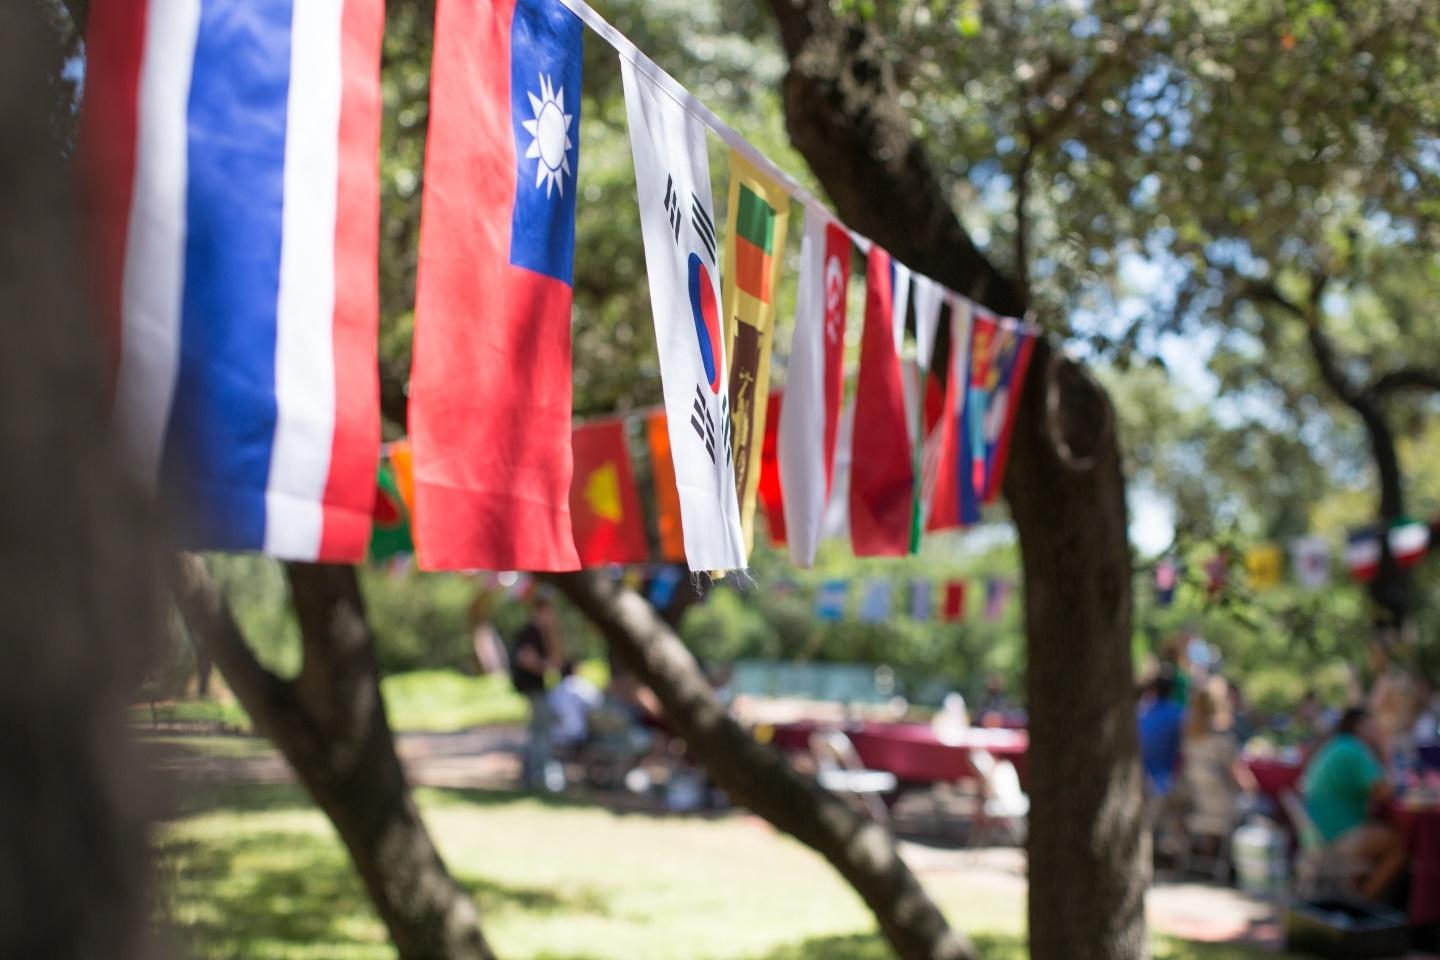 small flags hang on a line between two trees